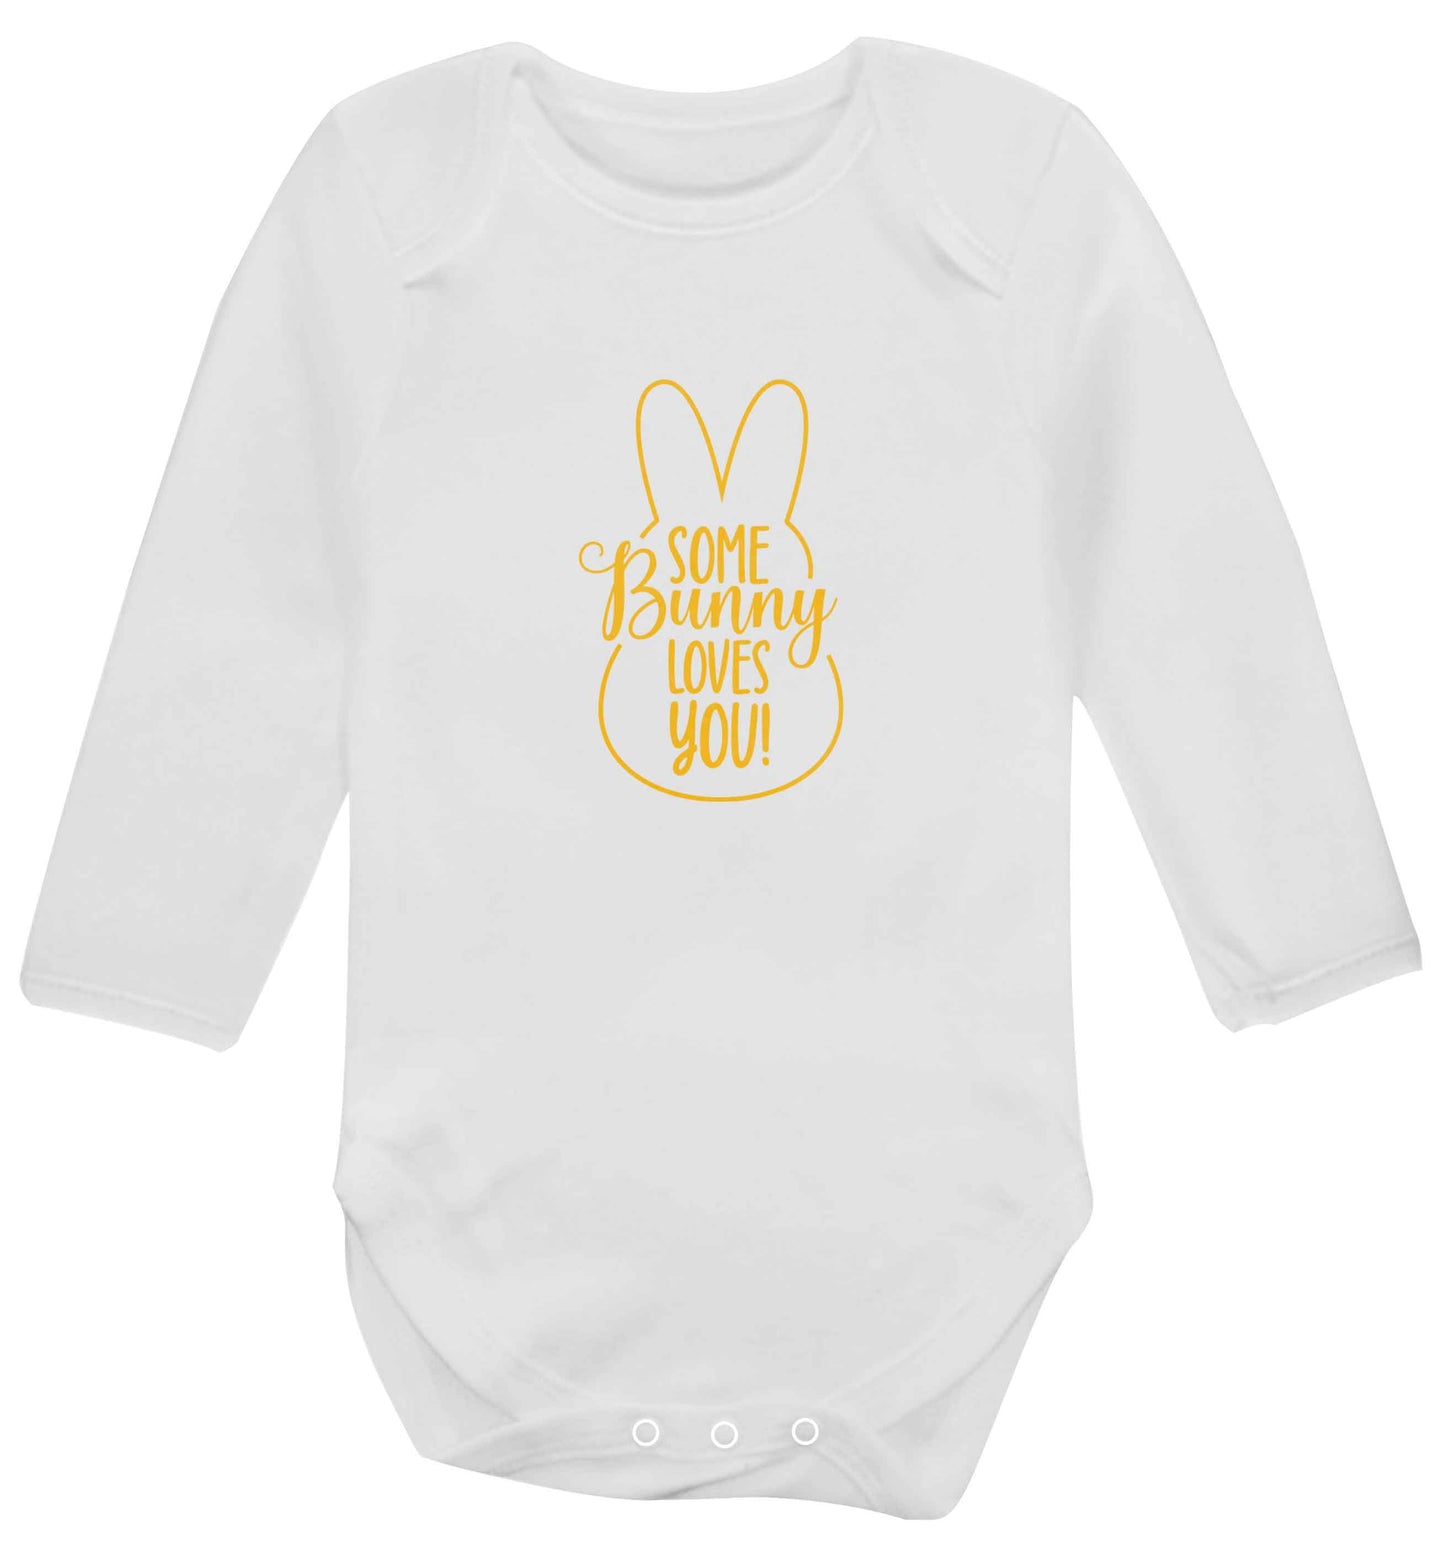 Some bunny loves you baby vest long sleeved white 6-12 months